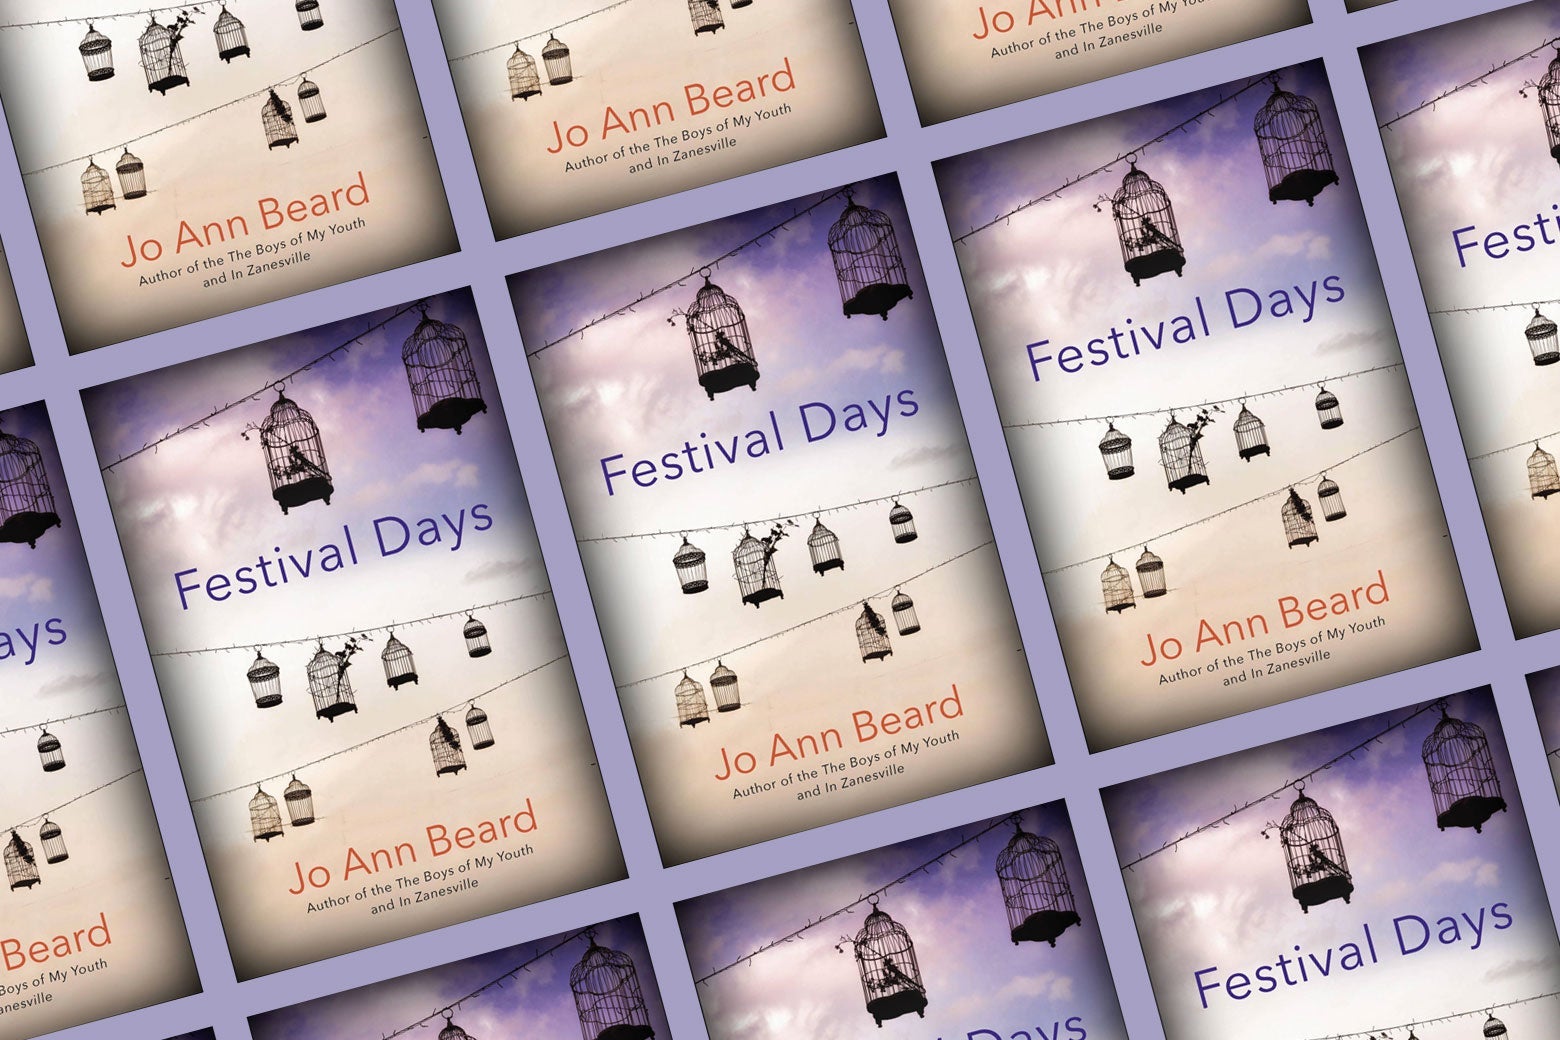 The cover of Festival Days, featuring birds in cages against the backdrop of a sky